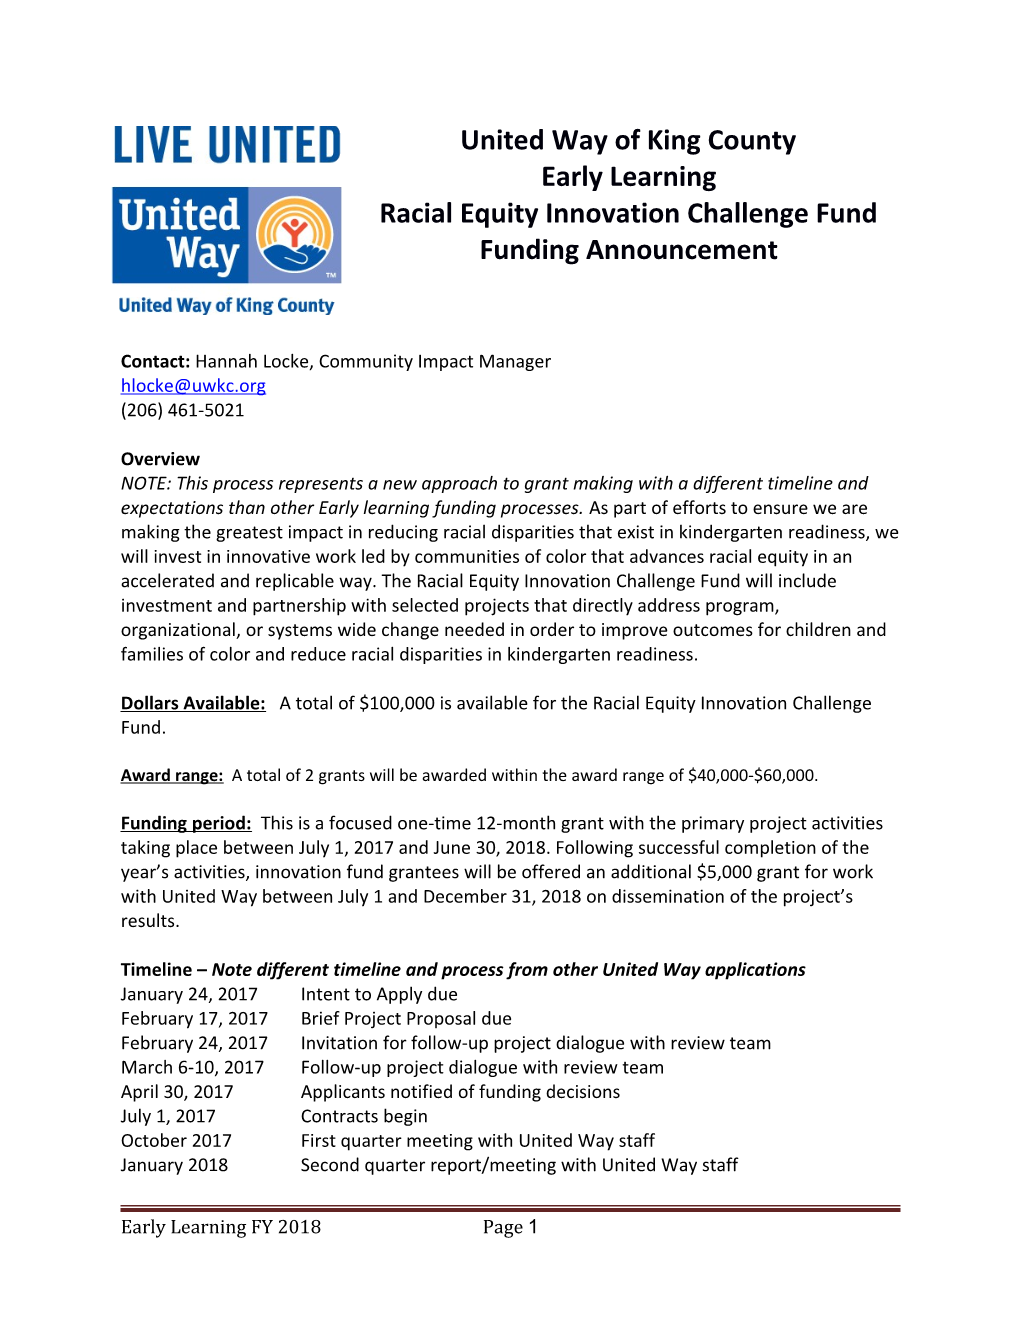 Racial Equity Innovation Challenge Fund